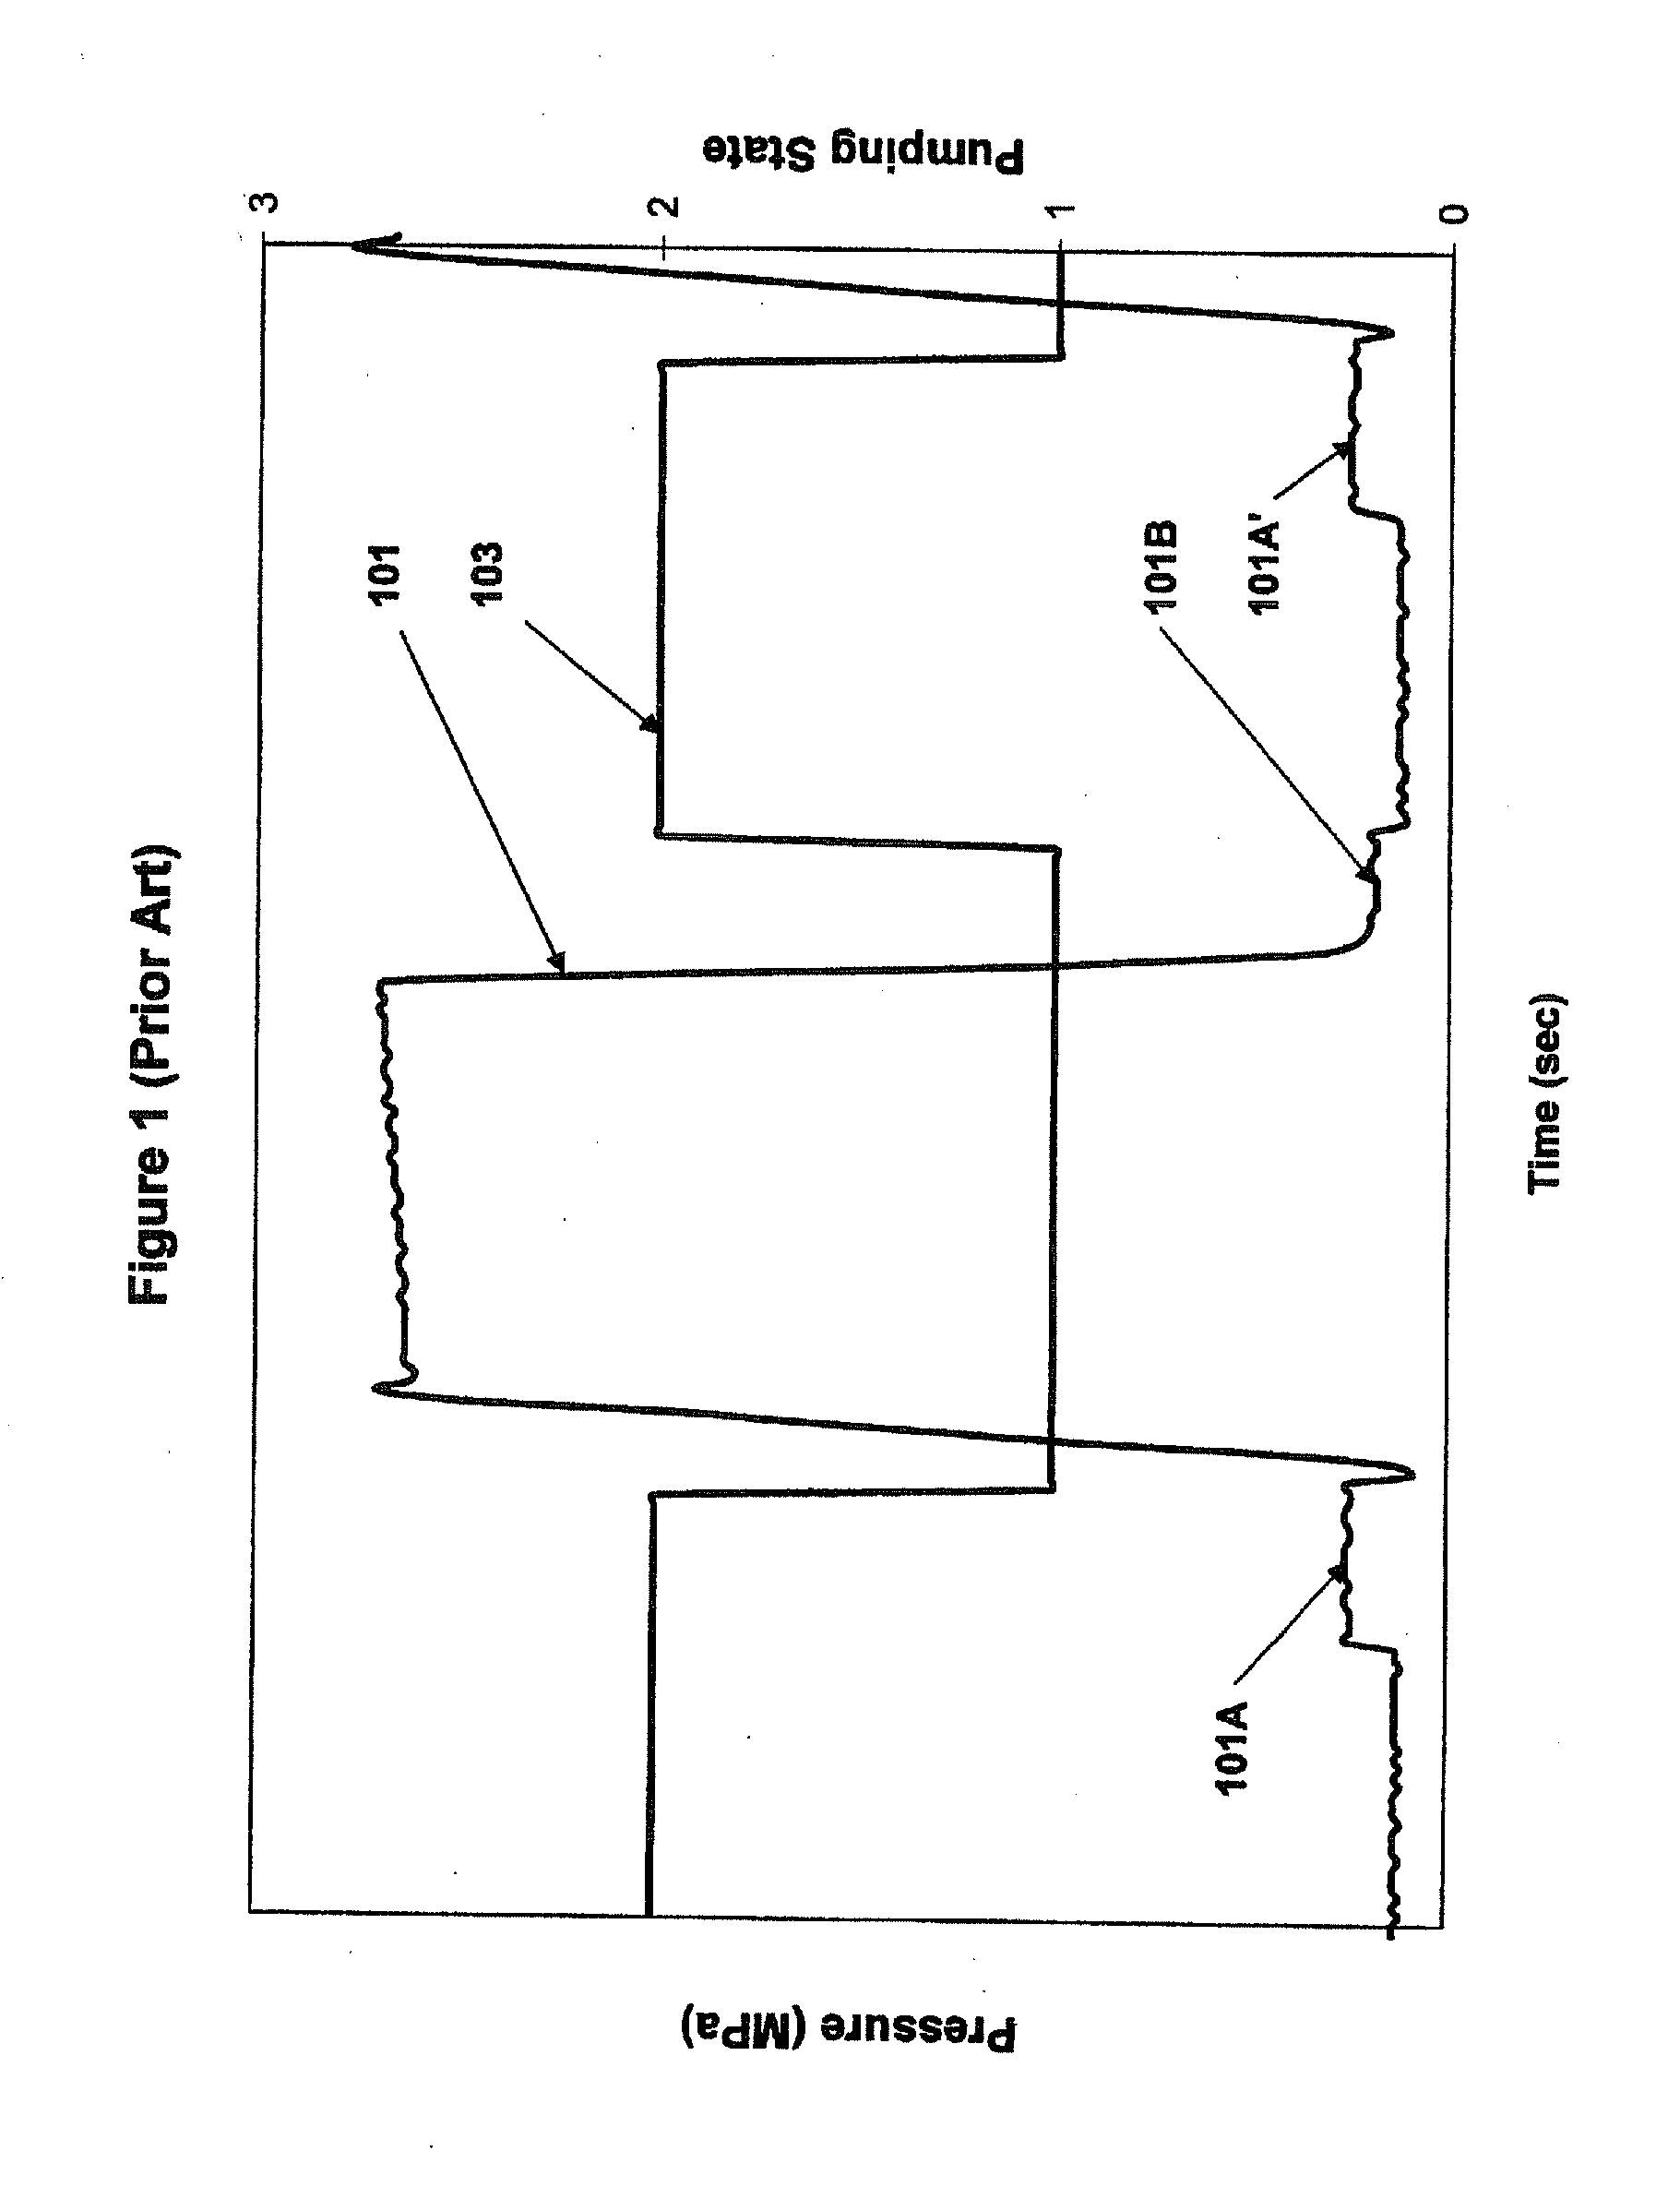 Hydraulic Drive System And Diagnostic Control Strategy For Improved Operation